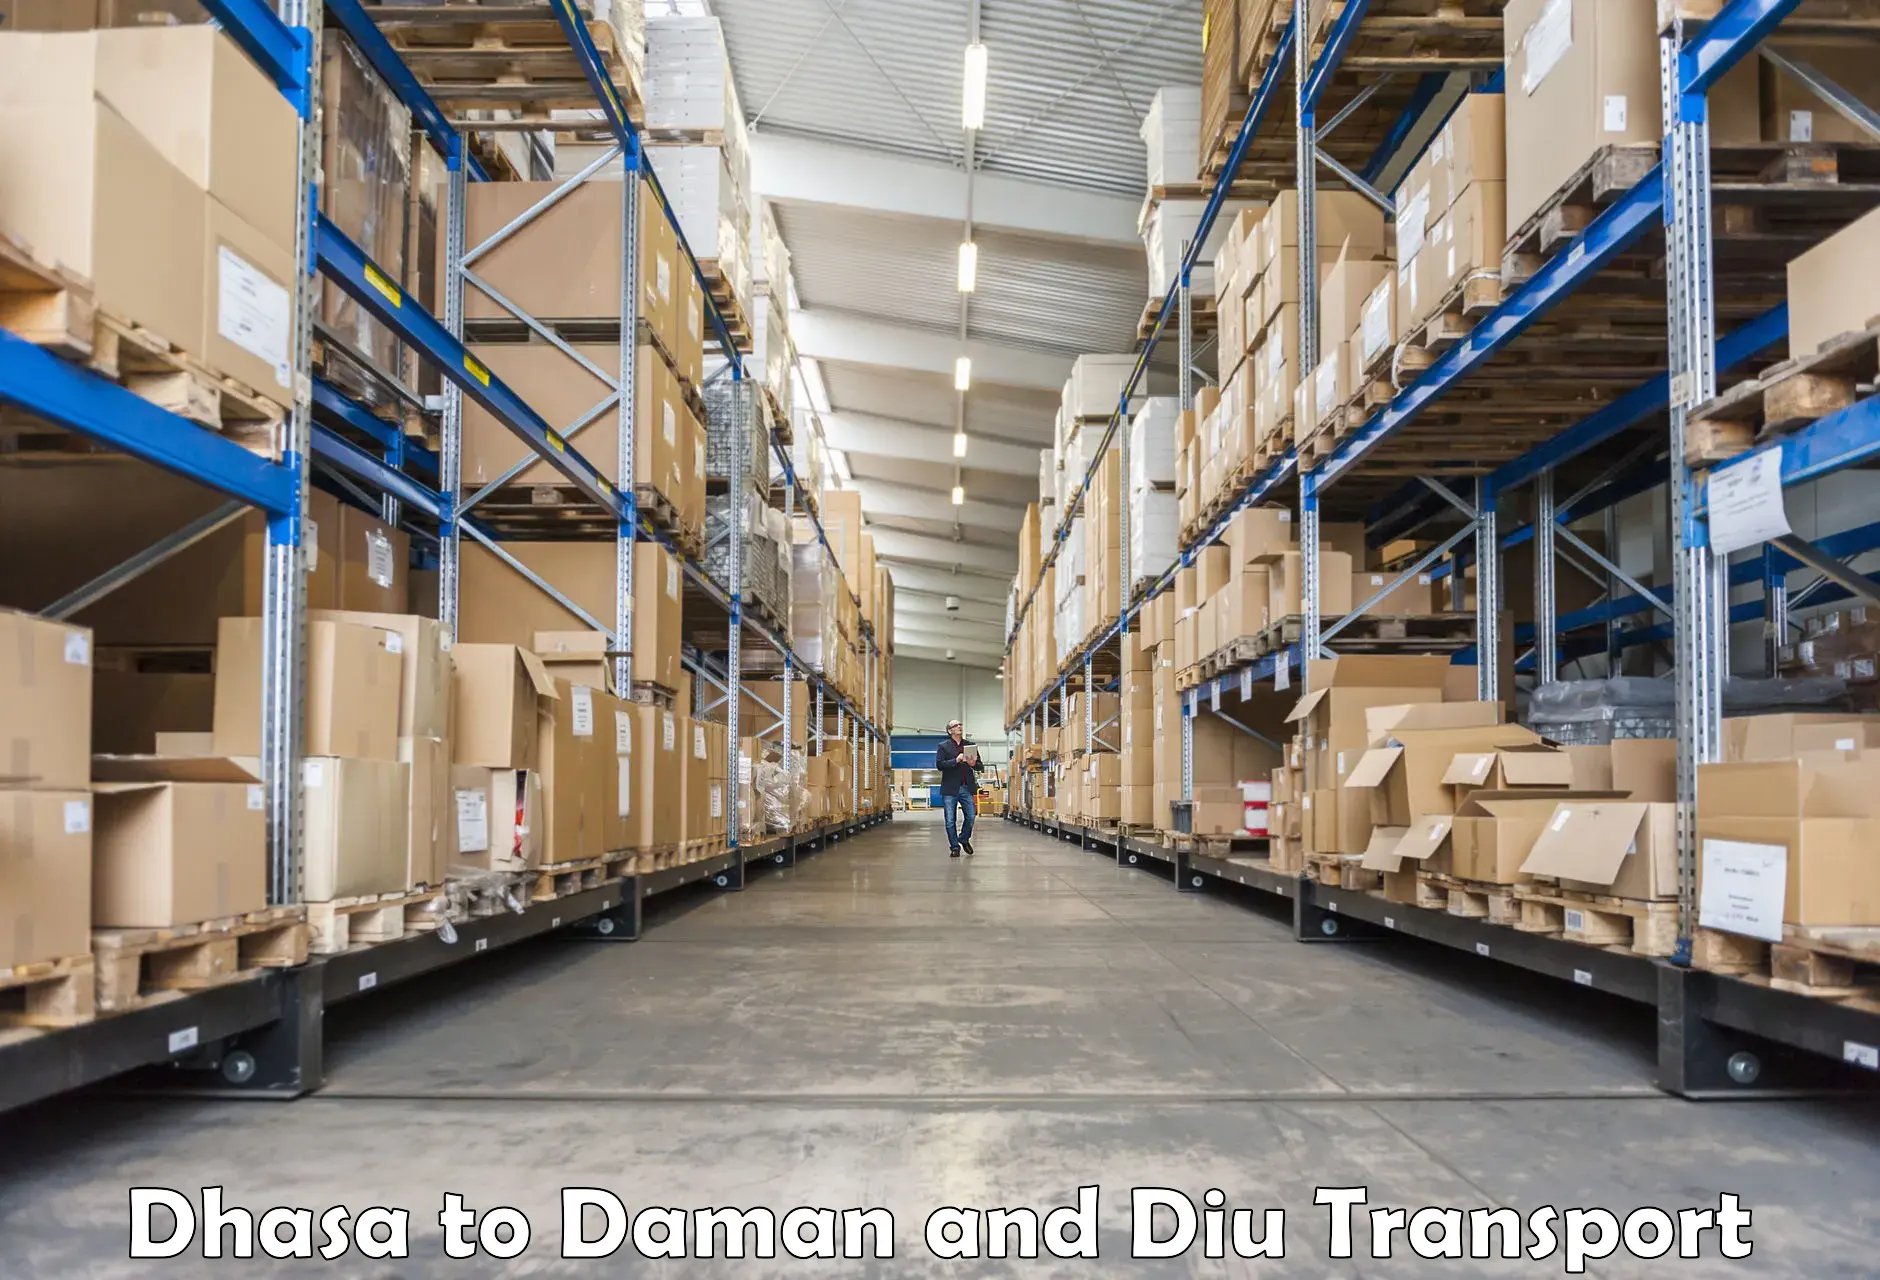 Luggage transport services Dhasa to Daman and Diu